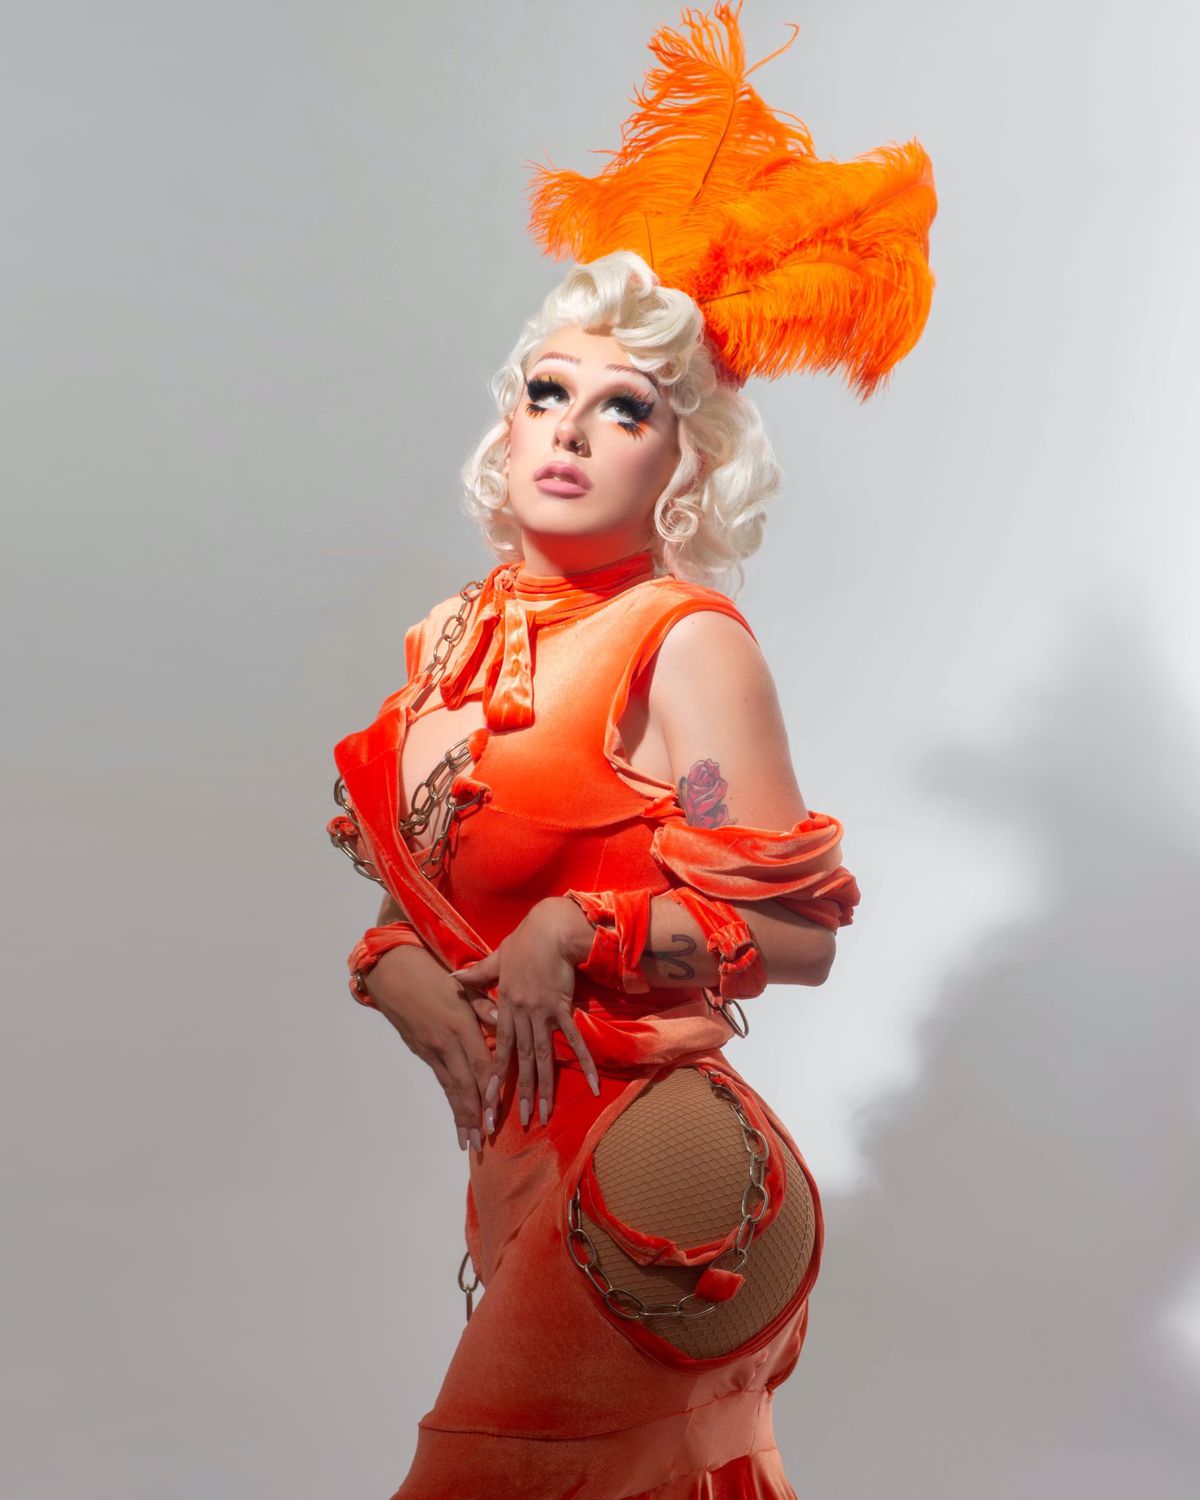 Drag queen Missy Steak is wearing a bright orange outfit, including a head feather.